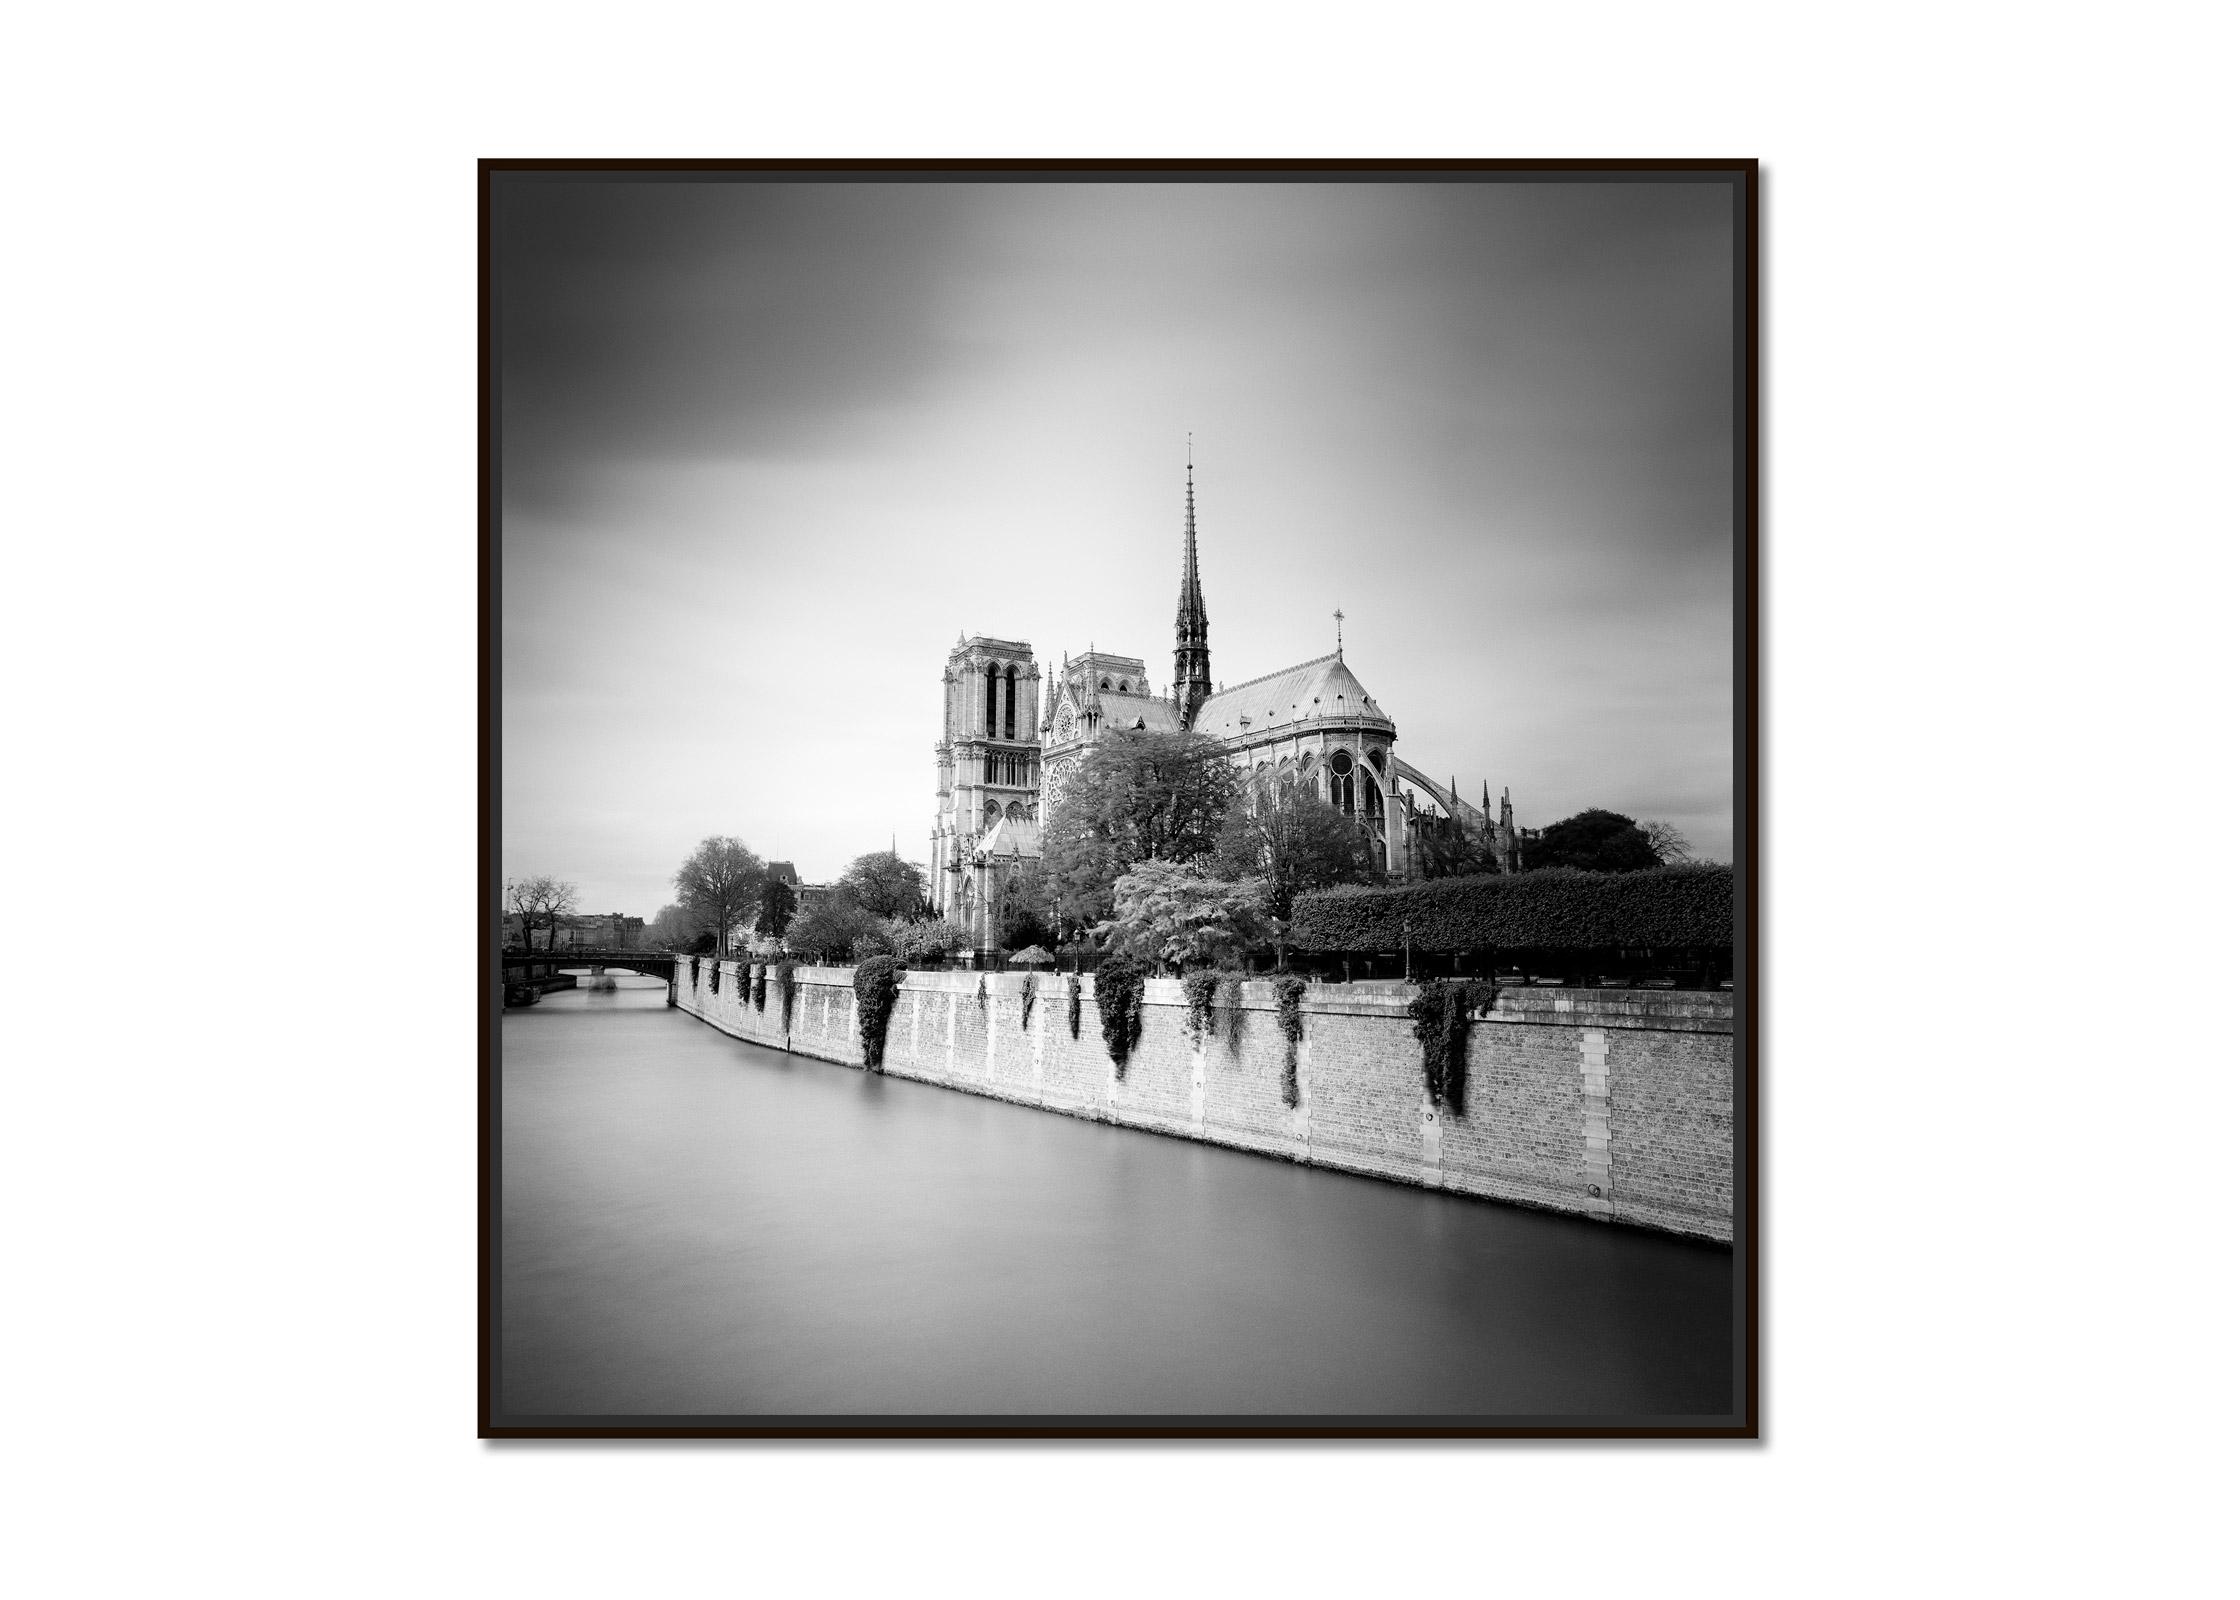 Notre Dame, Daylight, Seine, Paris France, black and white landscape photography - Photograph by Gerald Berghammer